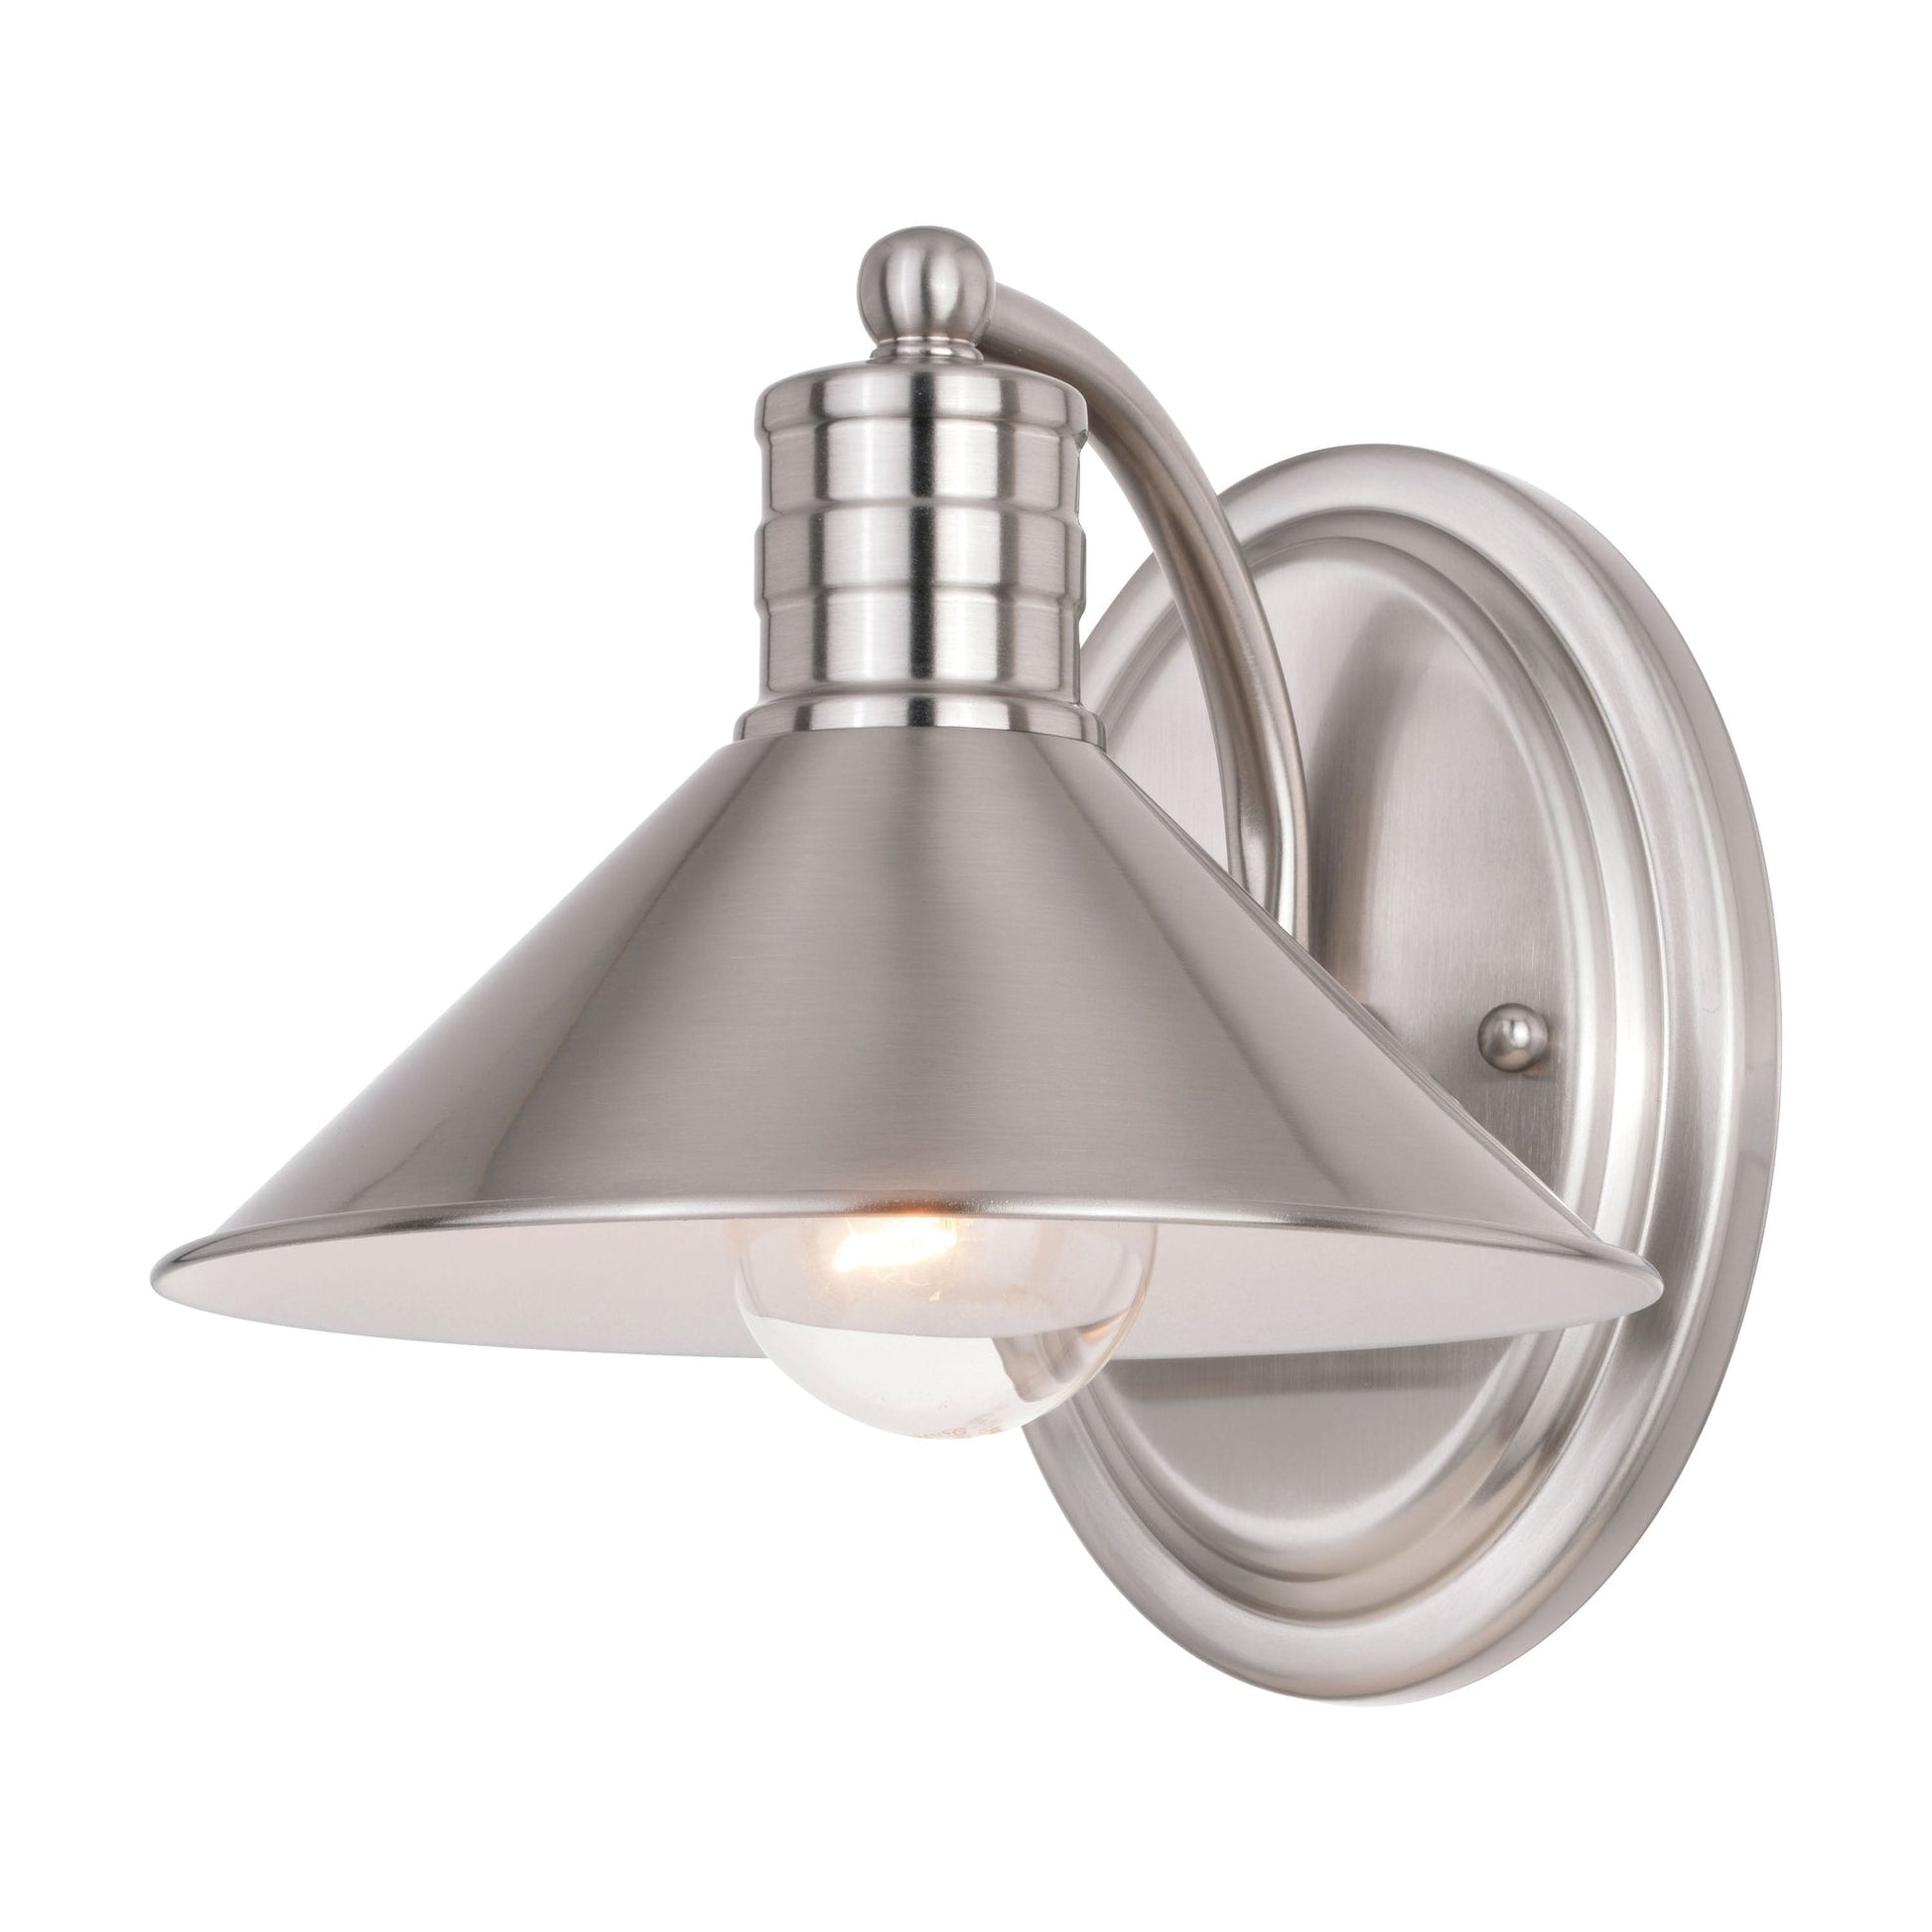 Vaxcel Akron 8" 1-Light Satin Nickel and Matte White Vanity Wall Sconce With Metal Shade